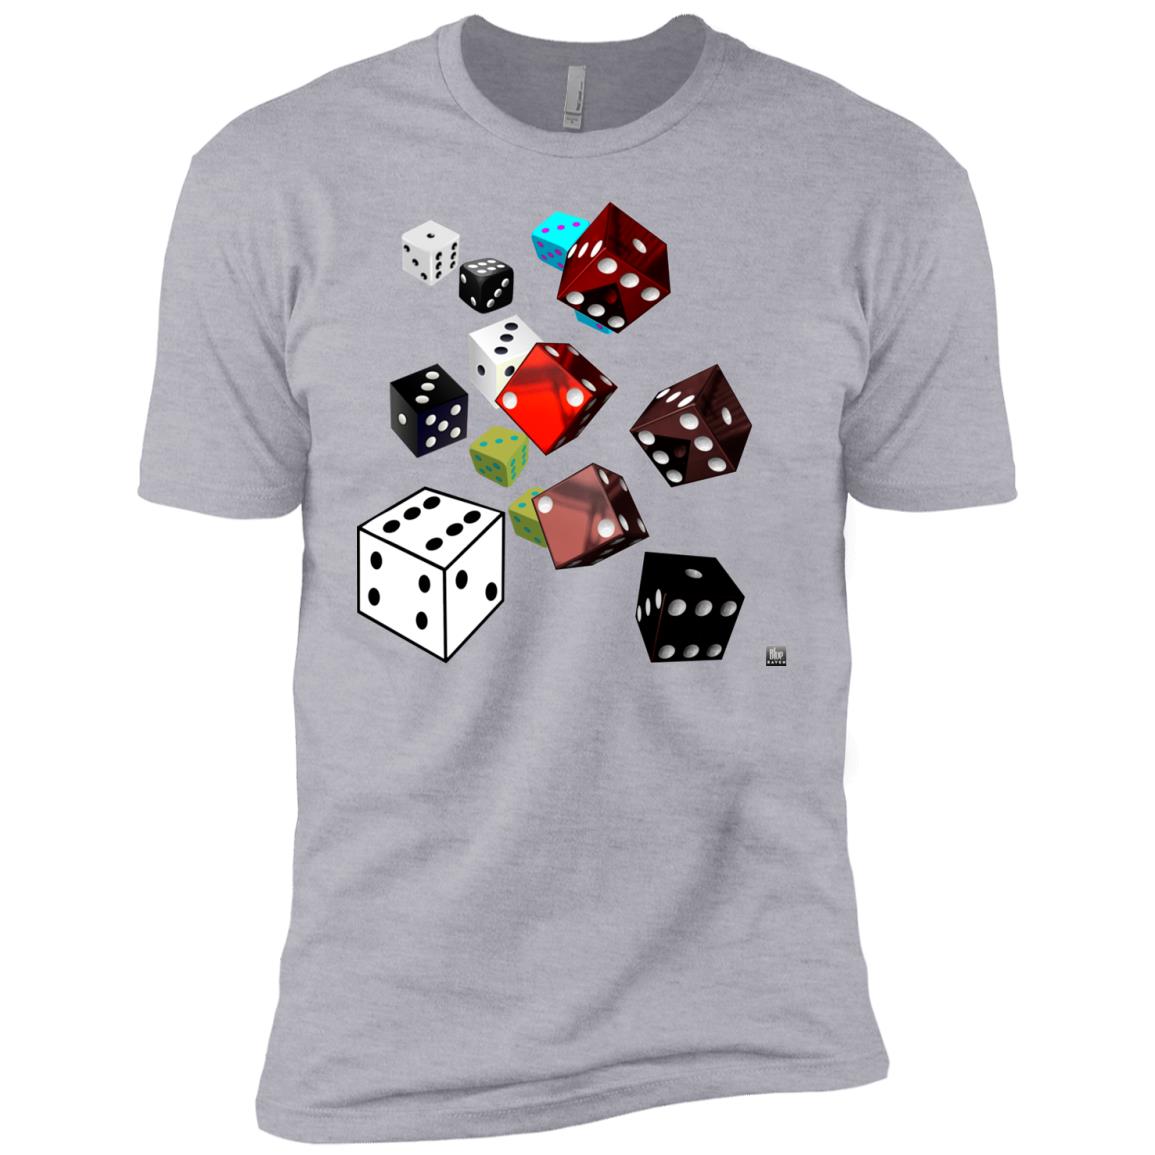 Roll Of The Dice - Boy's Premium T-Shirt